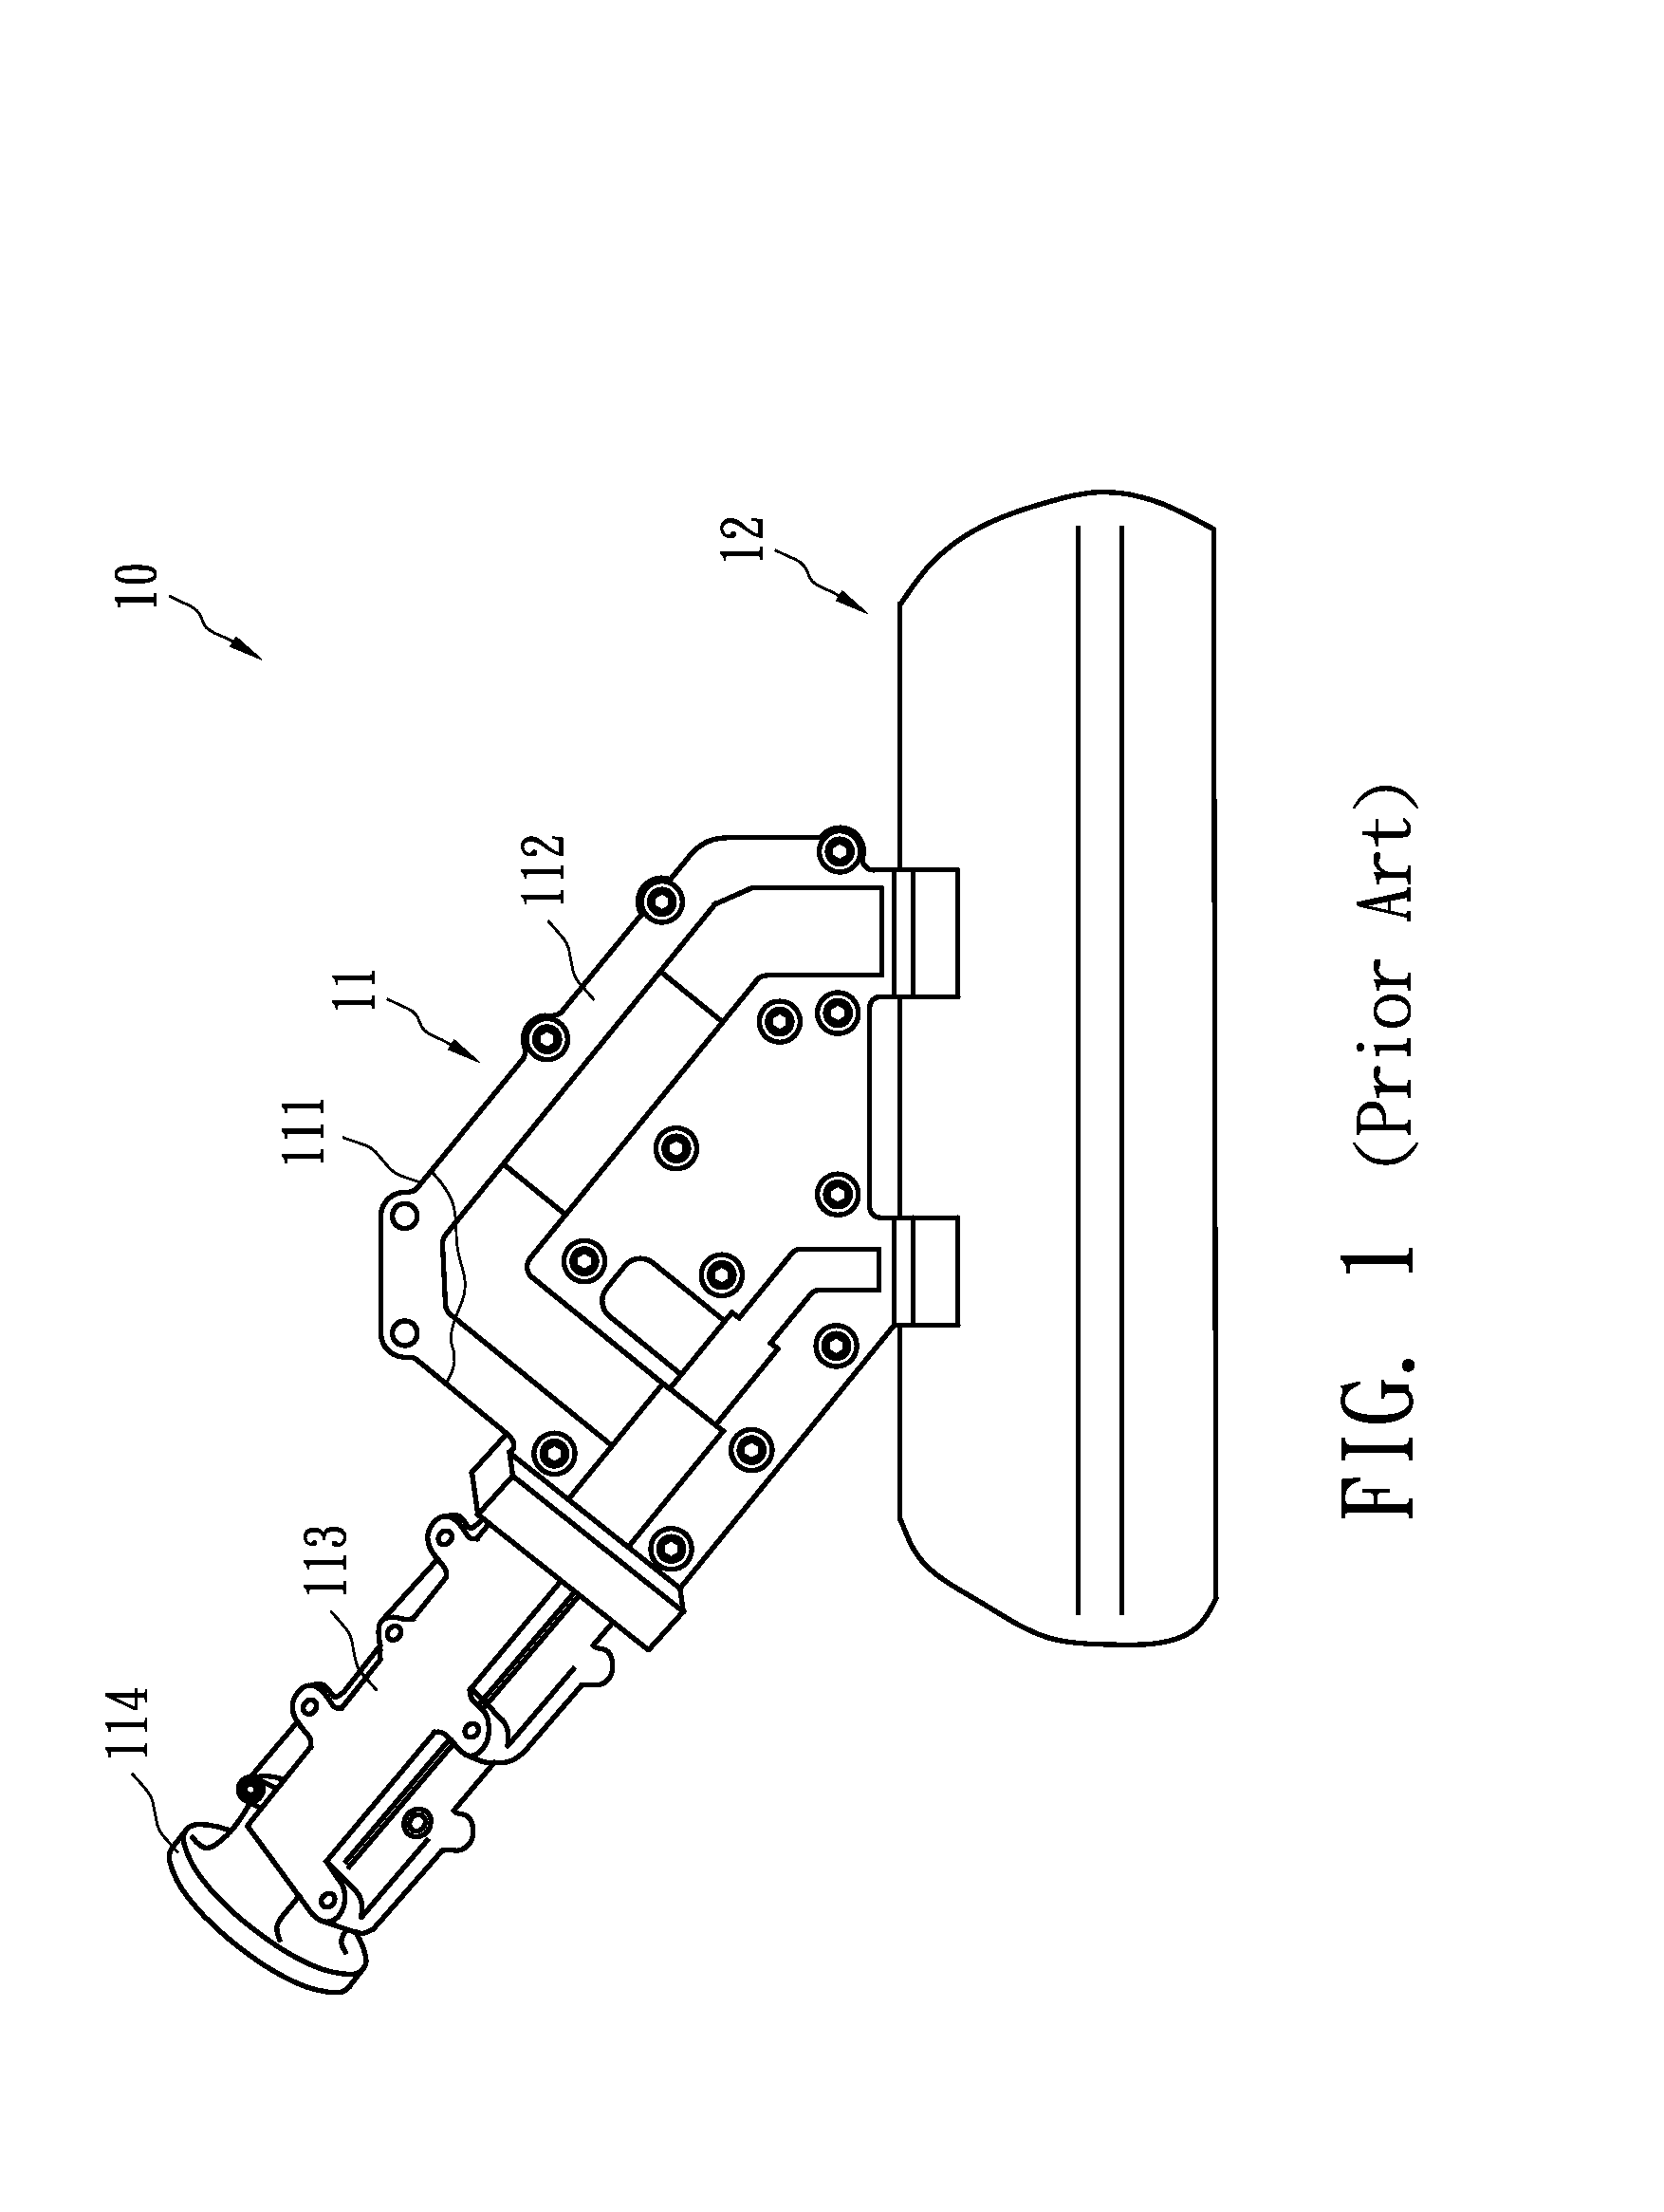 Integral high frequency communication apparatus